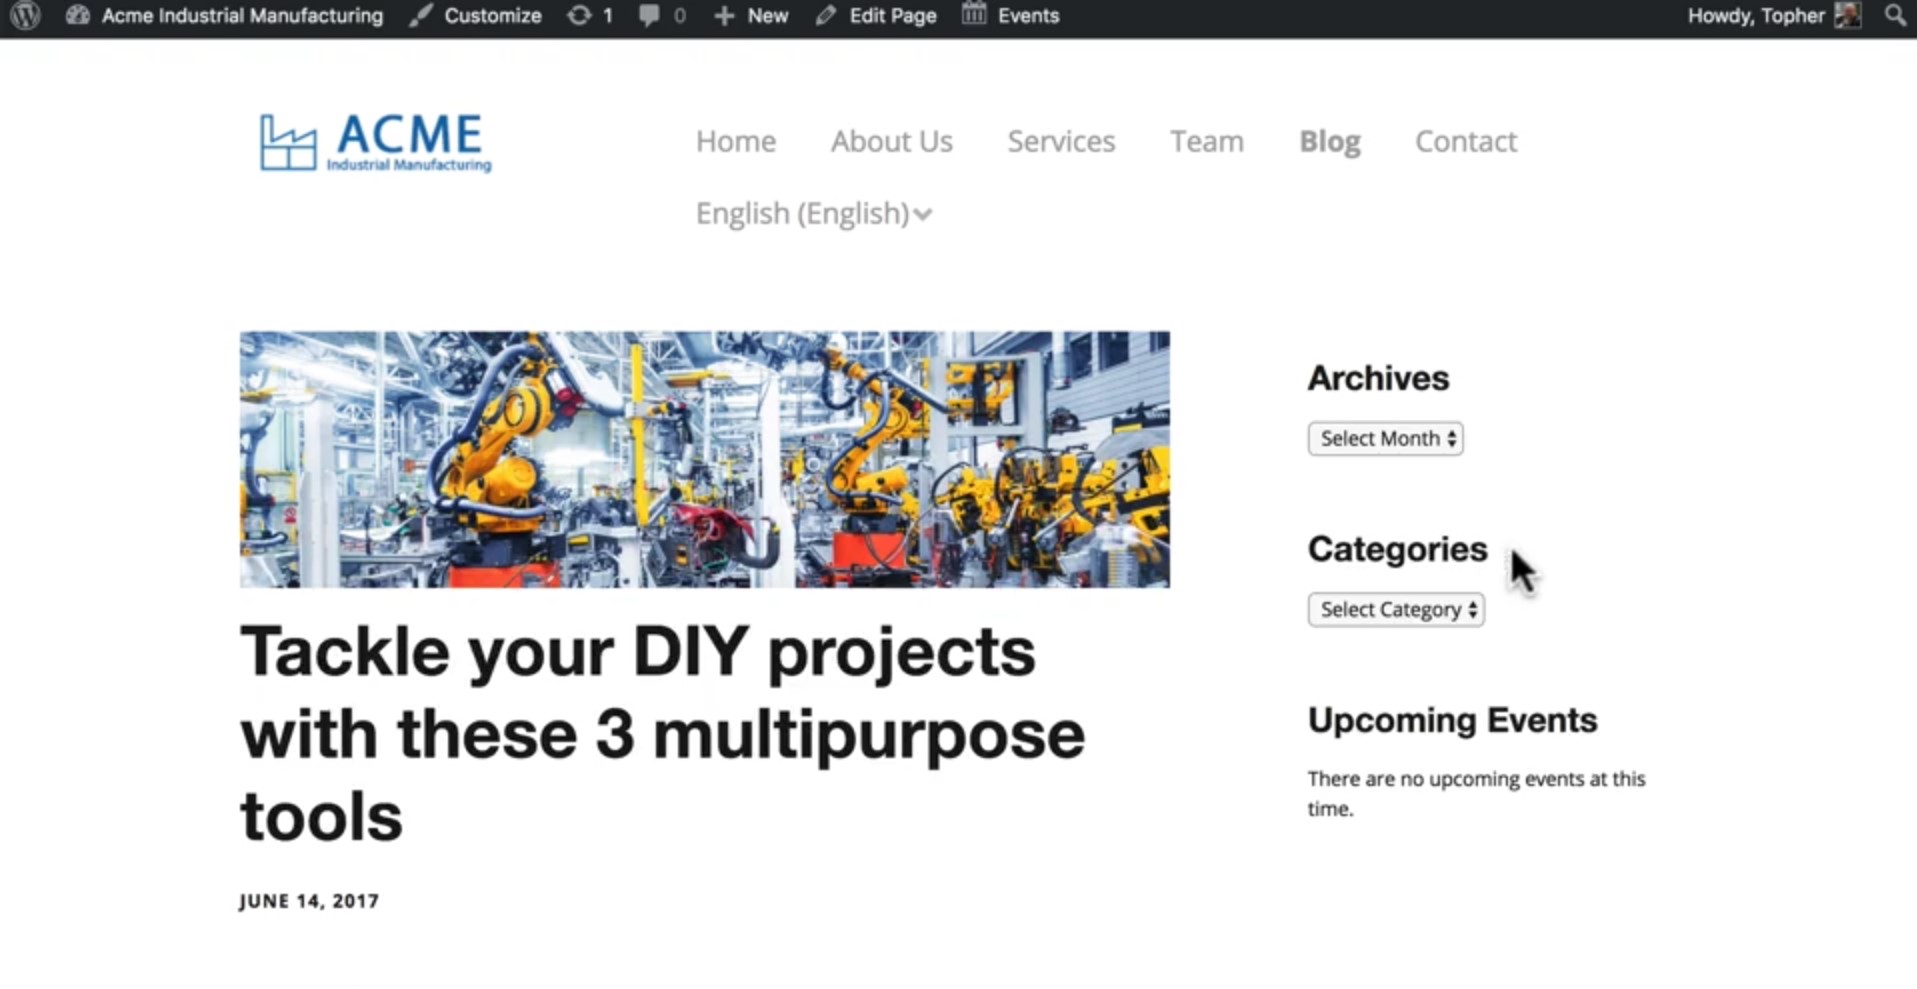 How to Build a Multilingual Website in WordPress - WPML - Translating Sidebars, Menus and More